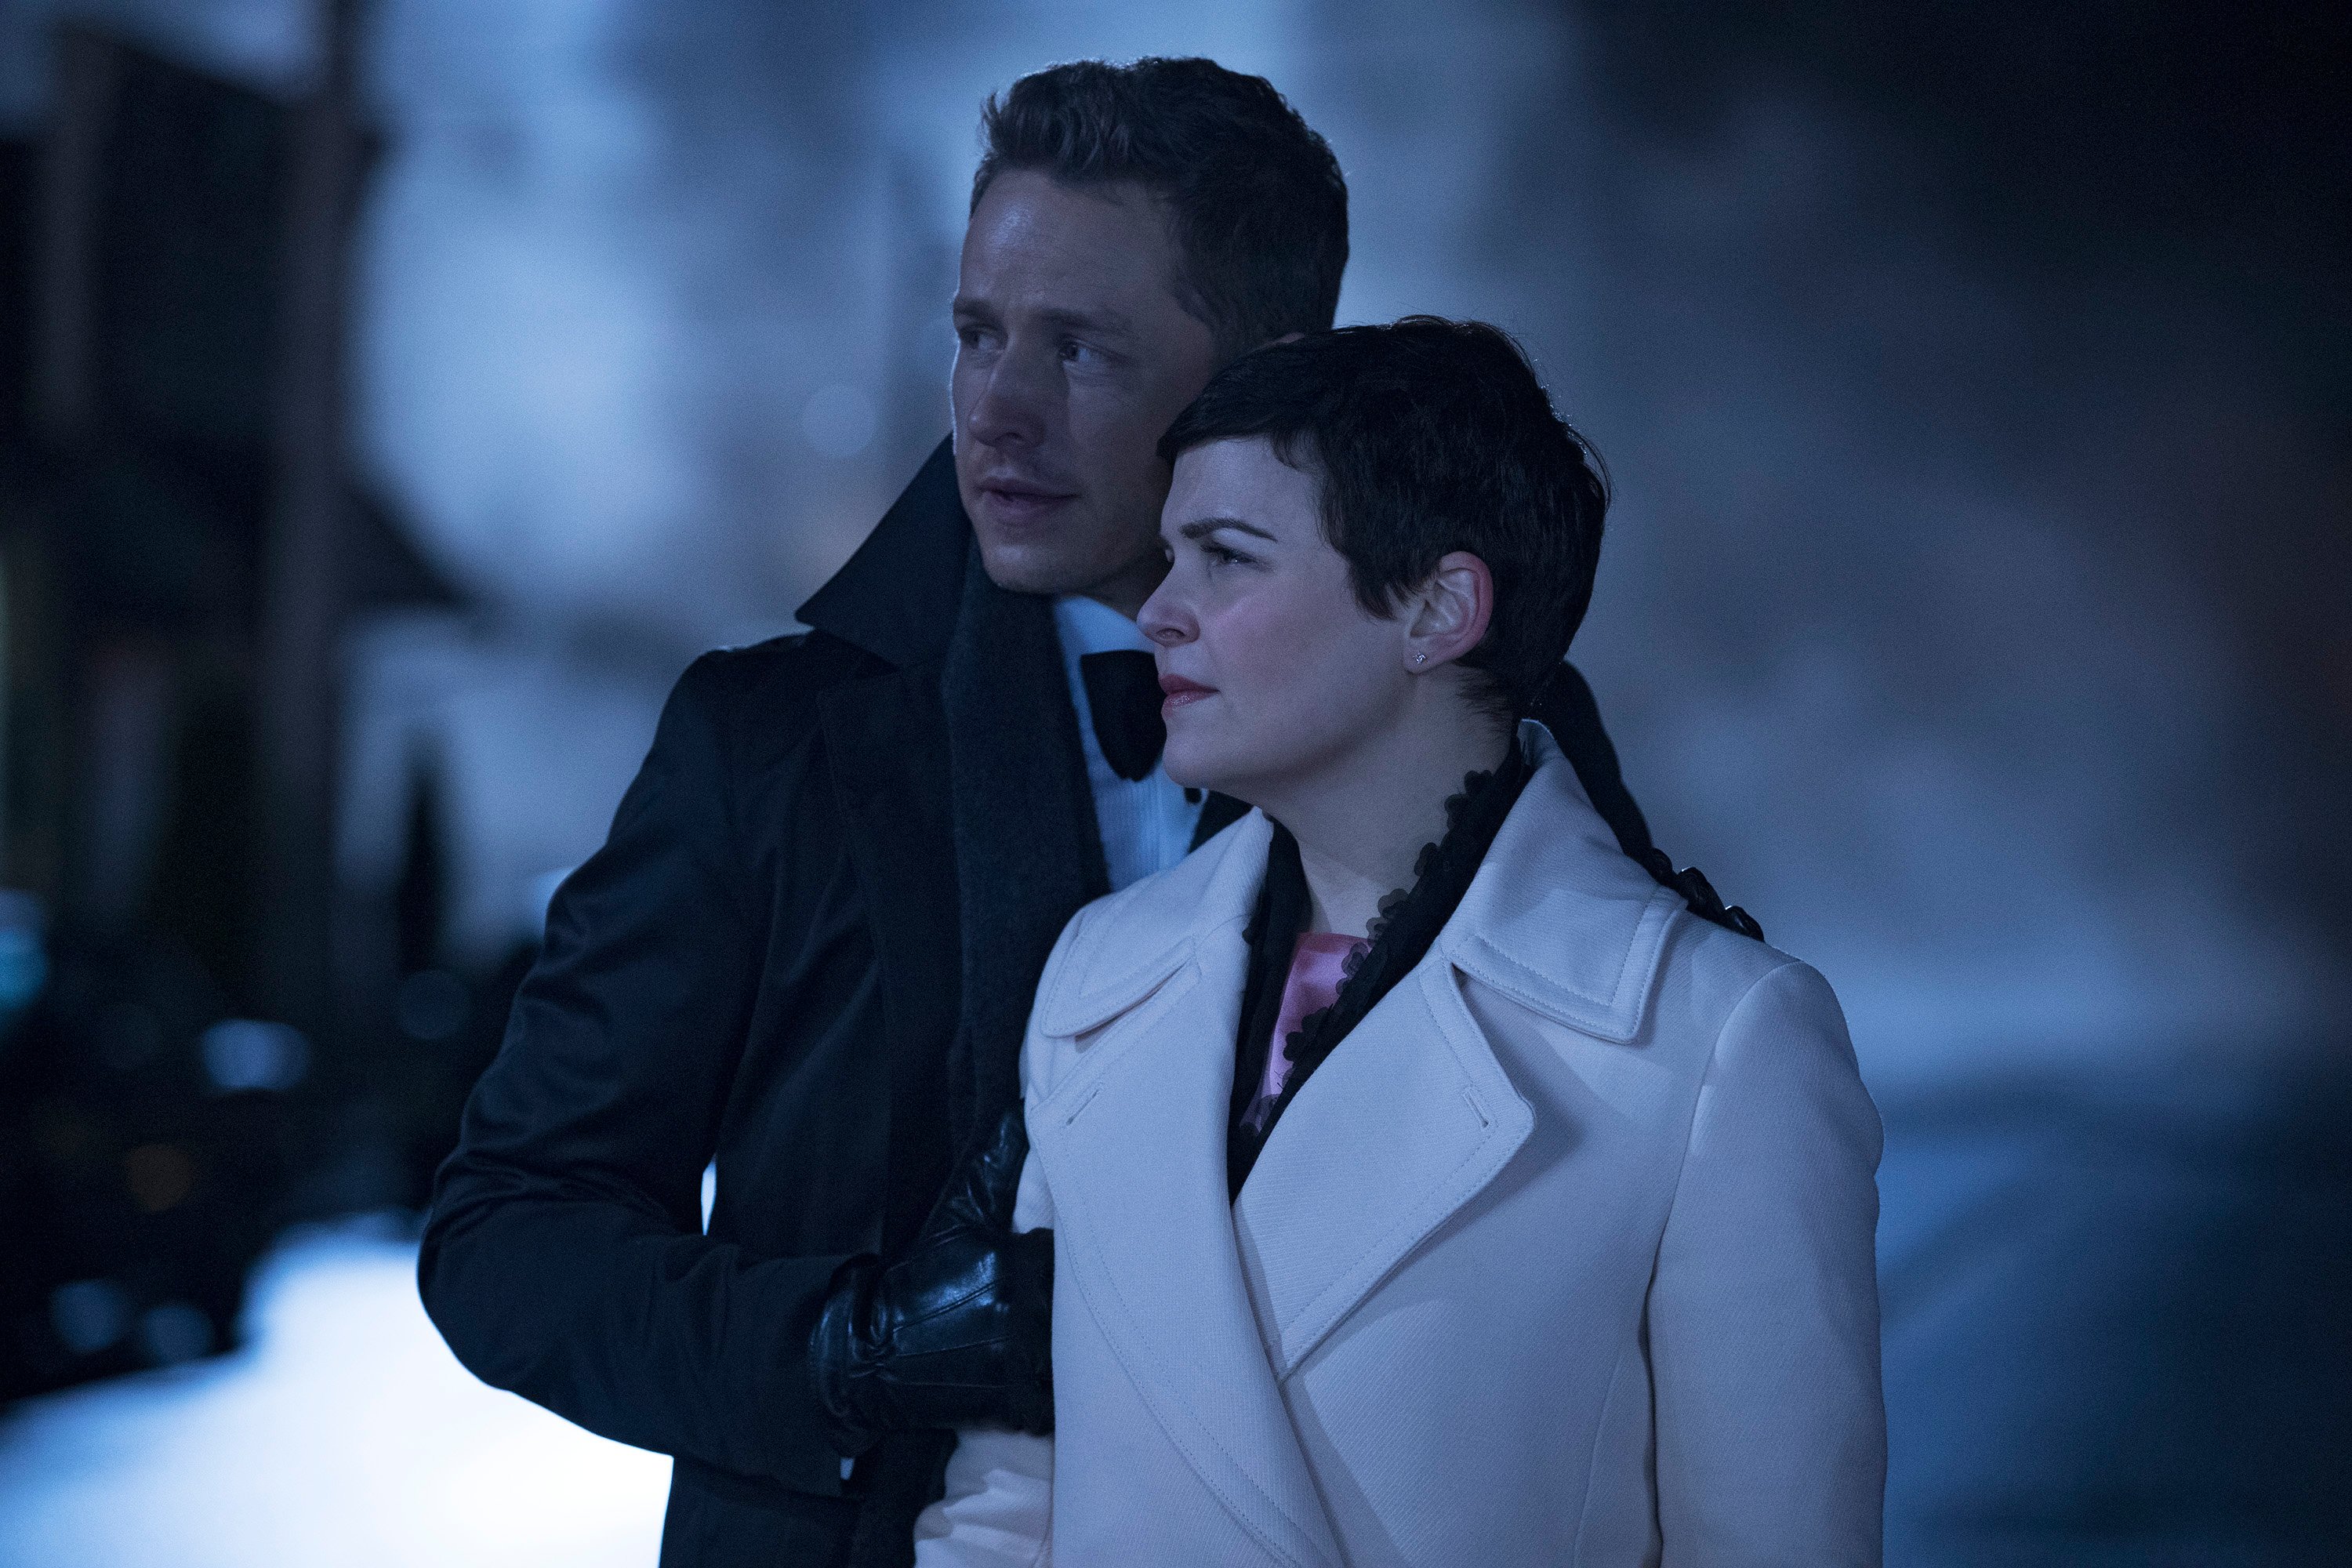 Josh Dallas standing and looking off to the distance in 'Once Upon a Time' episodes titled 'The Final Battle Part 1 & 2'